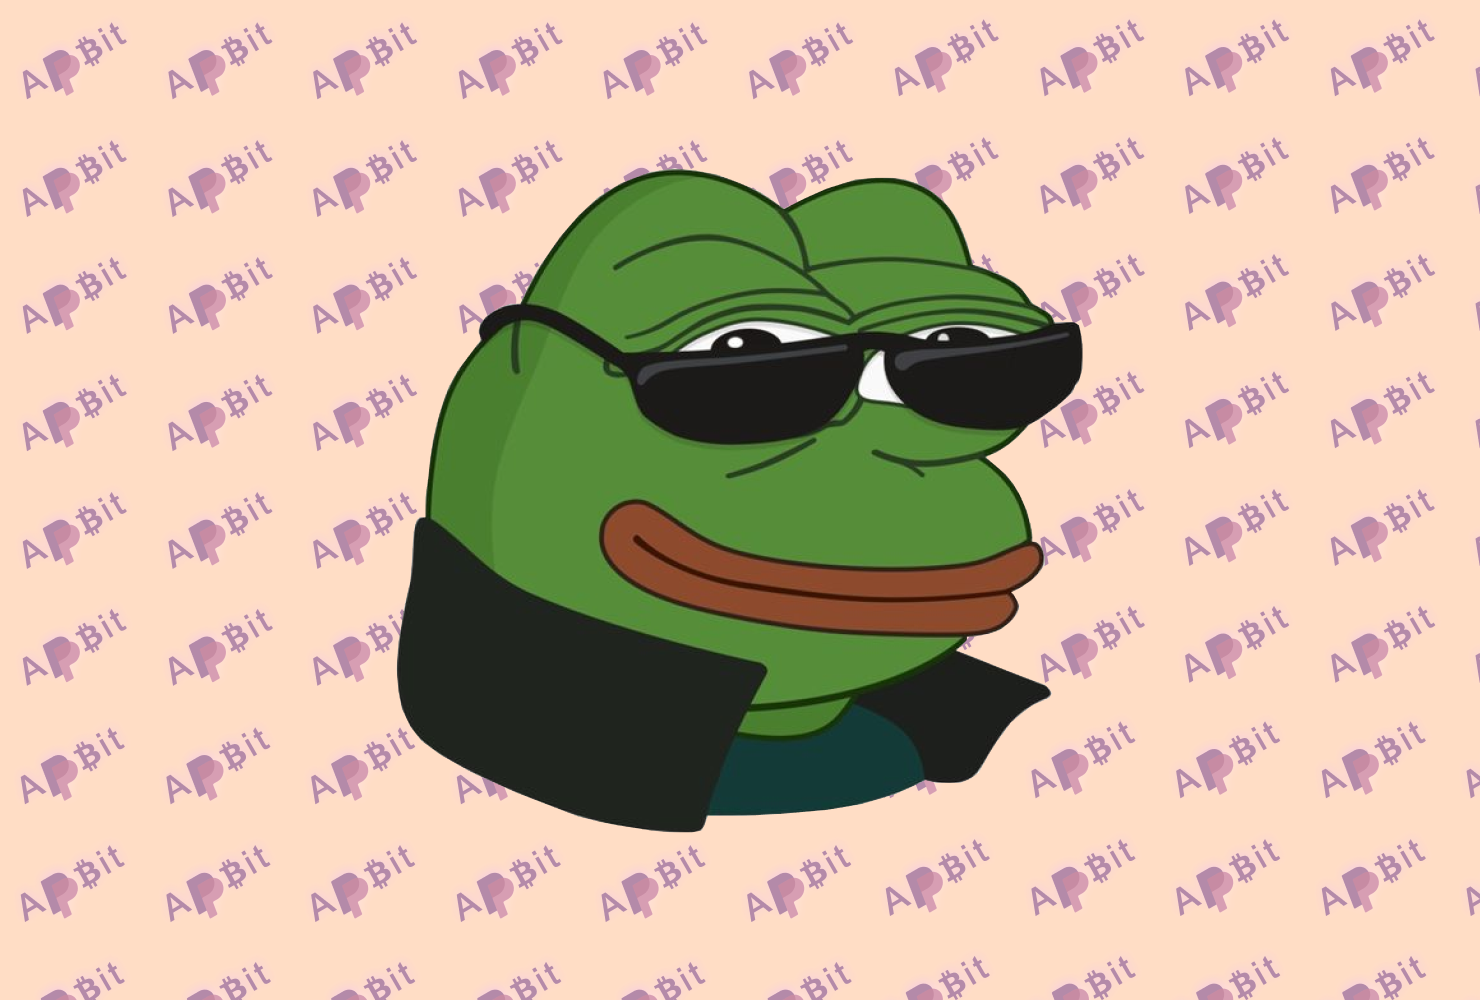 images/pepe.png